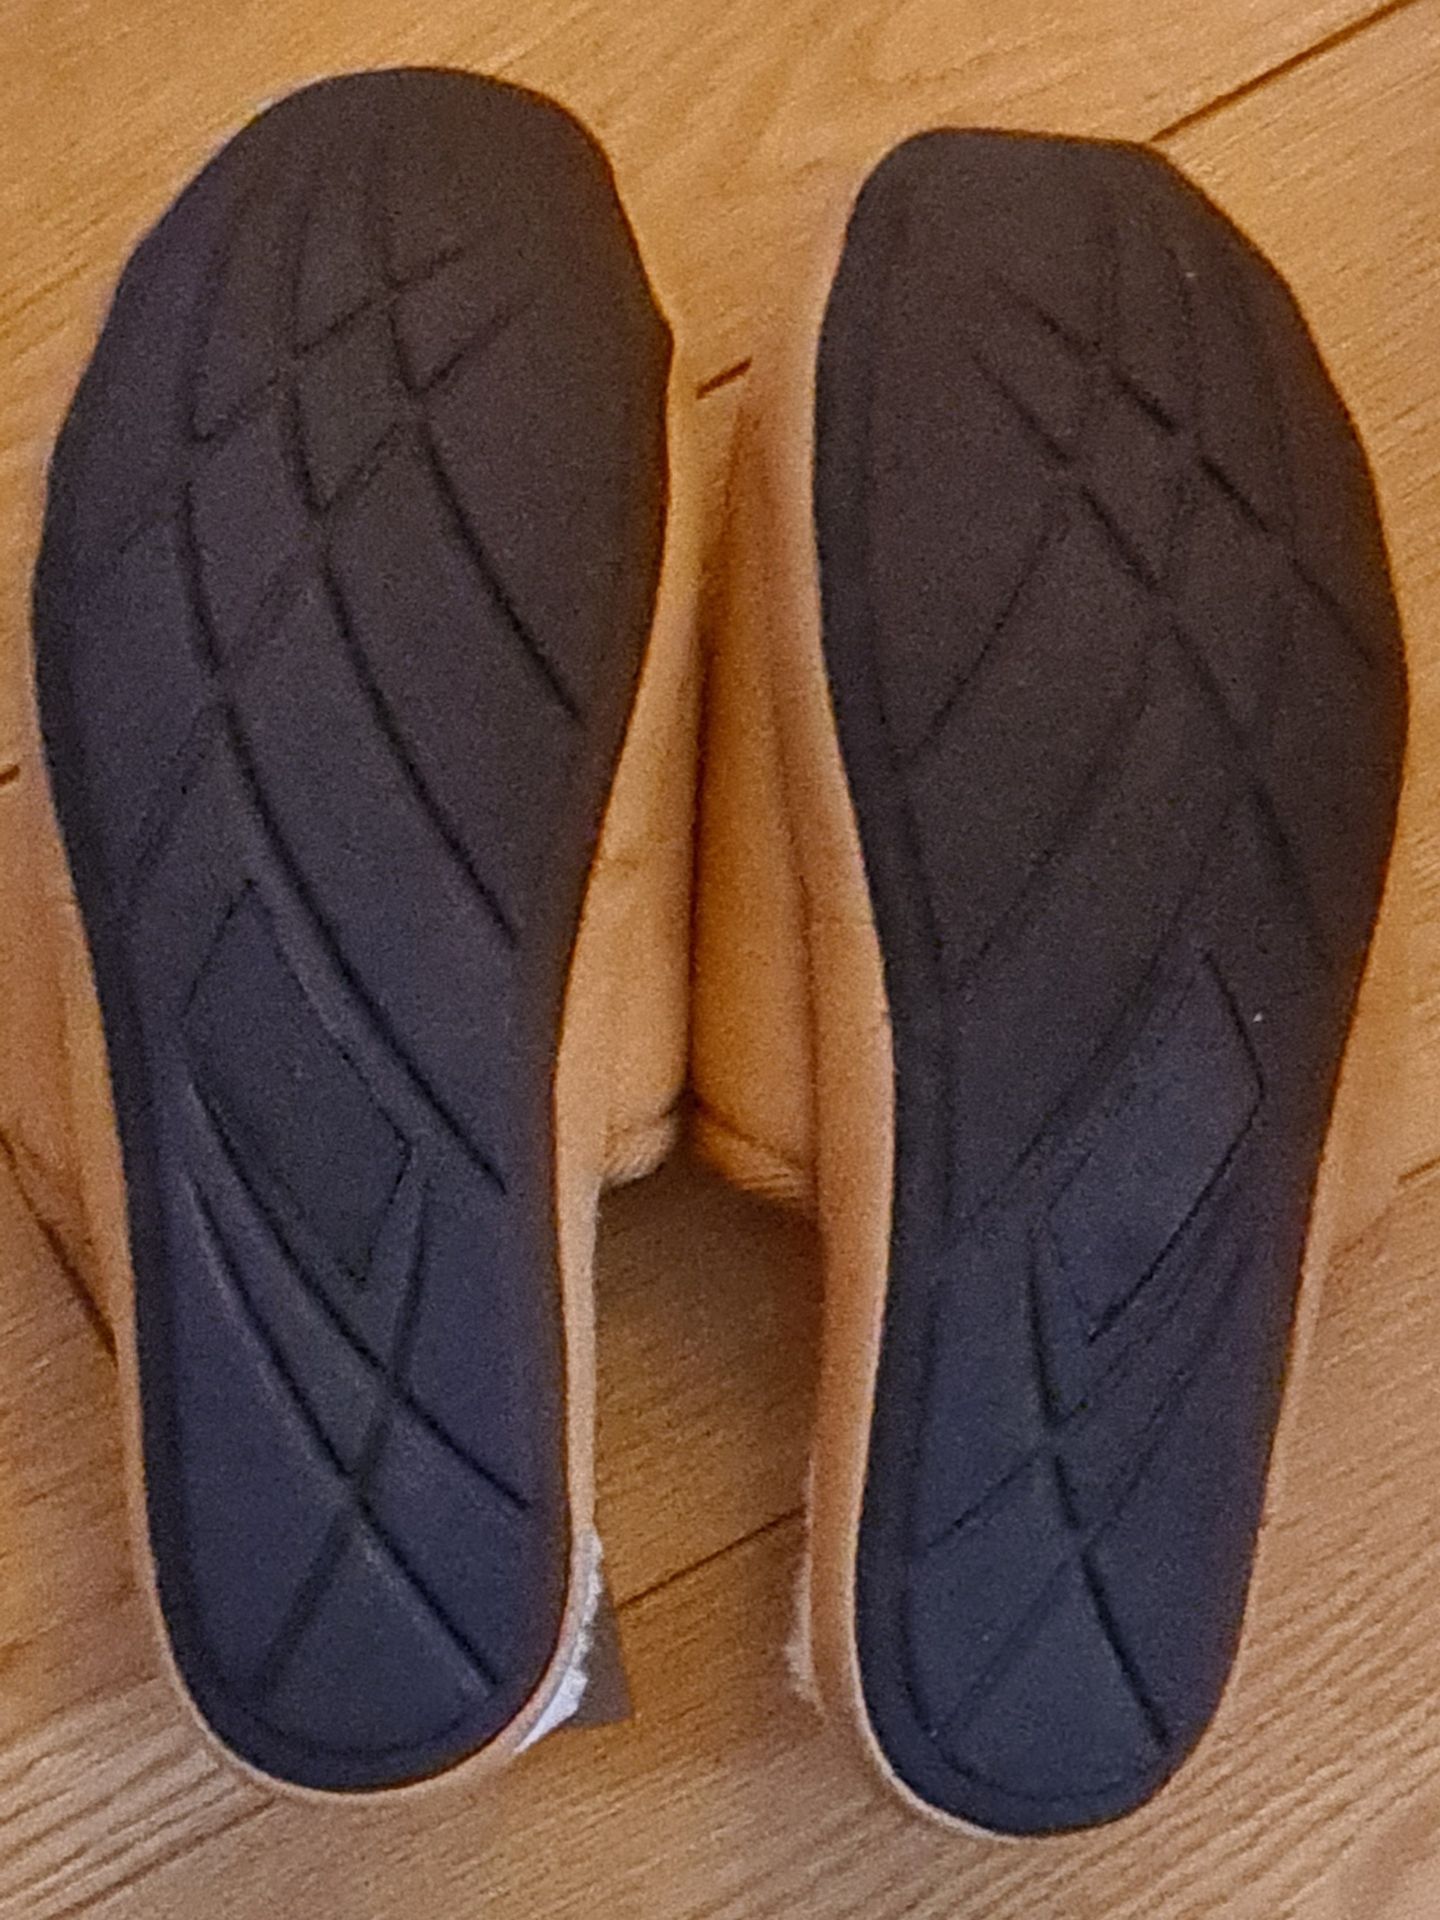 10 Sets Brand New John Lewis Slippers Size M RRP £20.00 Each - Image 2 of 3